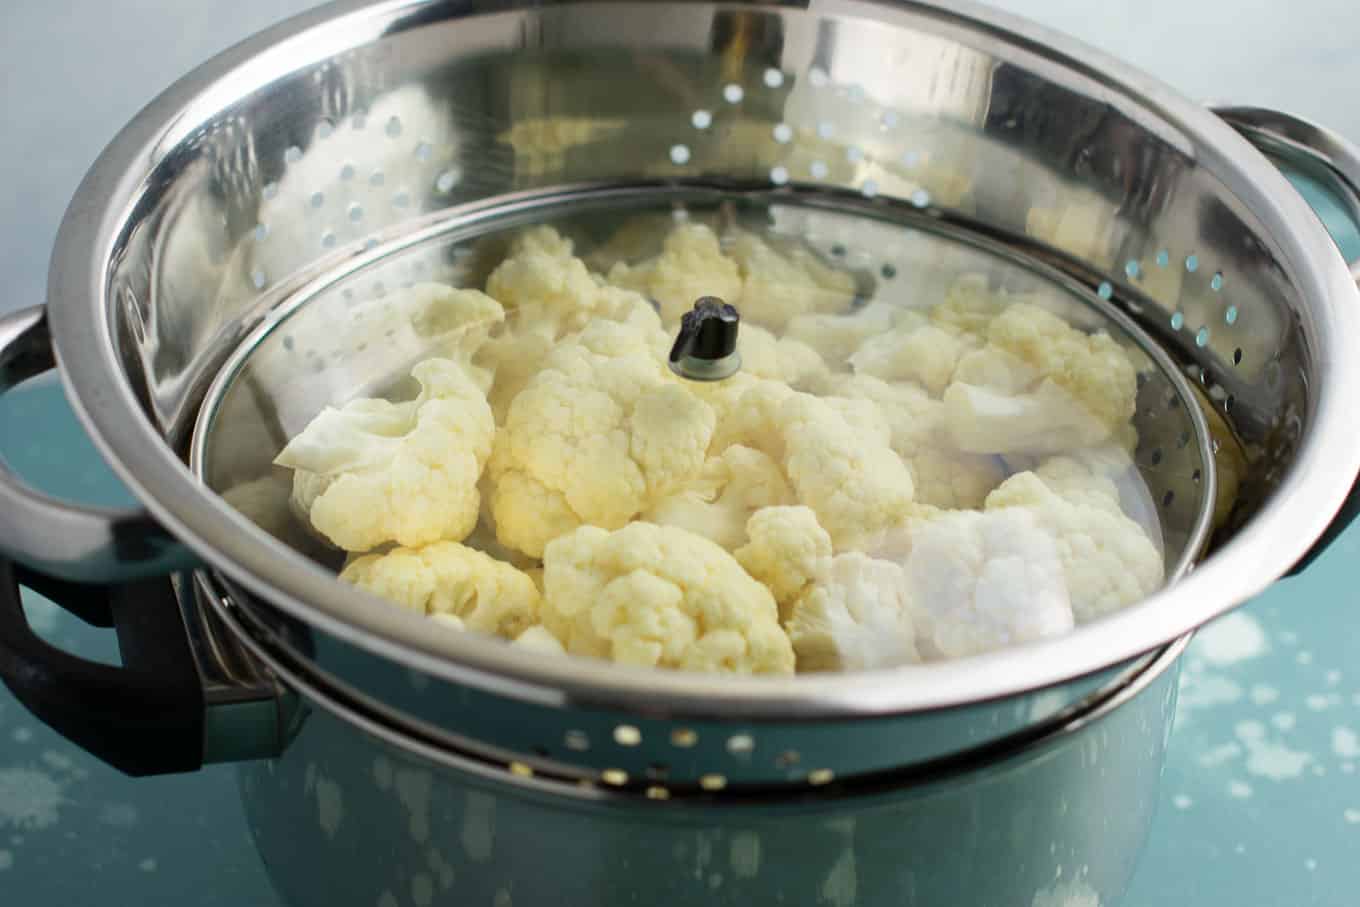 How to steam cauliflower with a pot, strainer, and lid